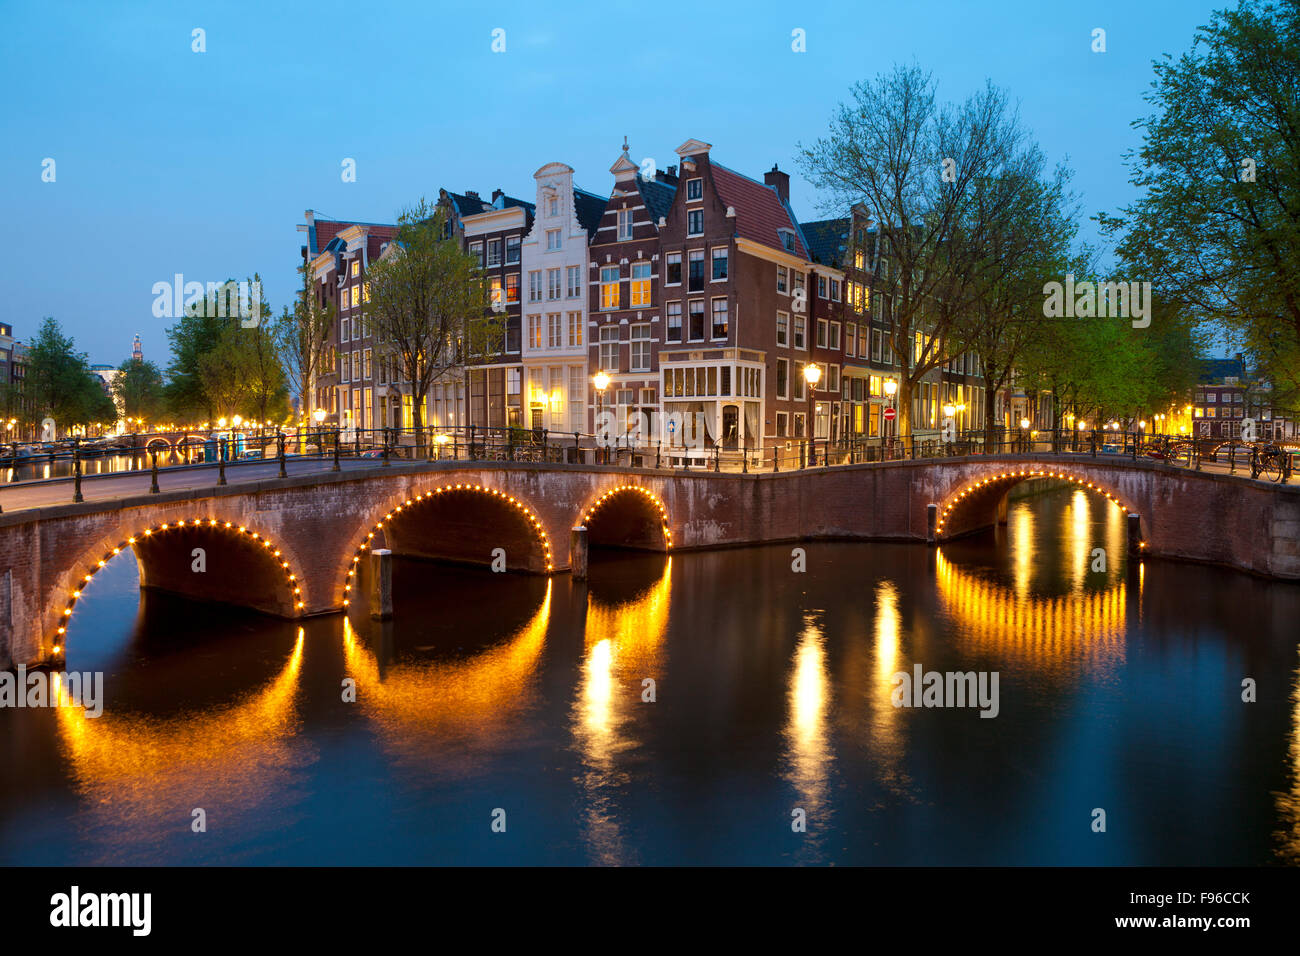 Historic Houses and Bridge along Keizersgracht Canal, Amsterdam, Netherlands Stock Photo